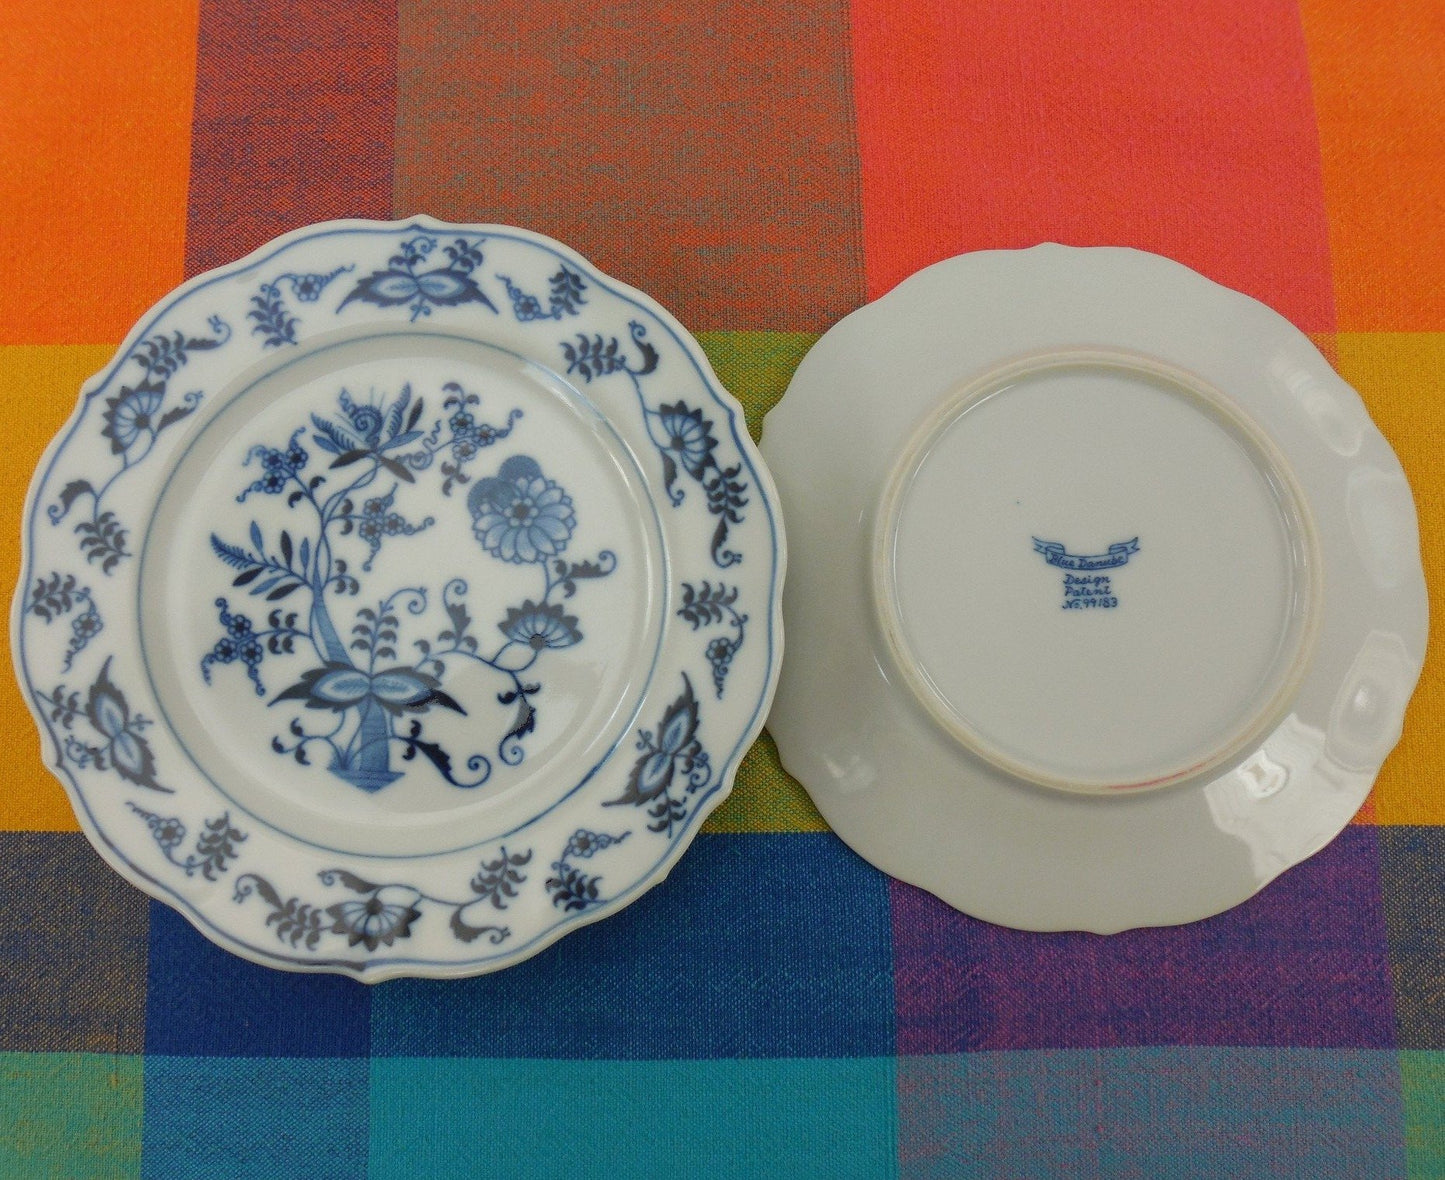 Blue Danube China Japan - 4 Set Bread and Butter Plates - Ribbon Banner Mark Vintage Used